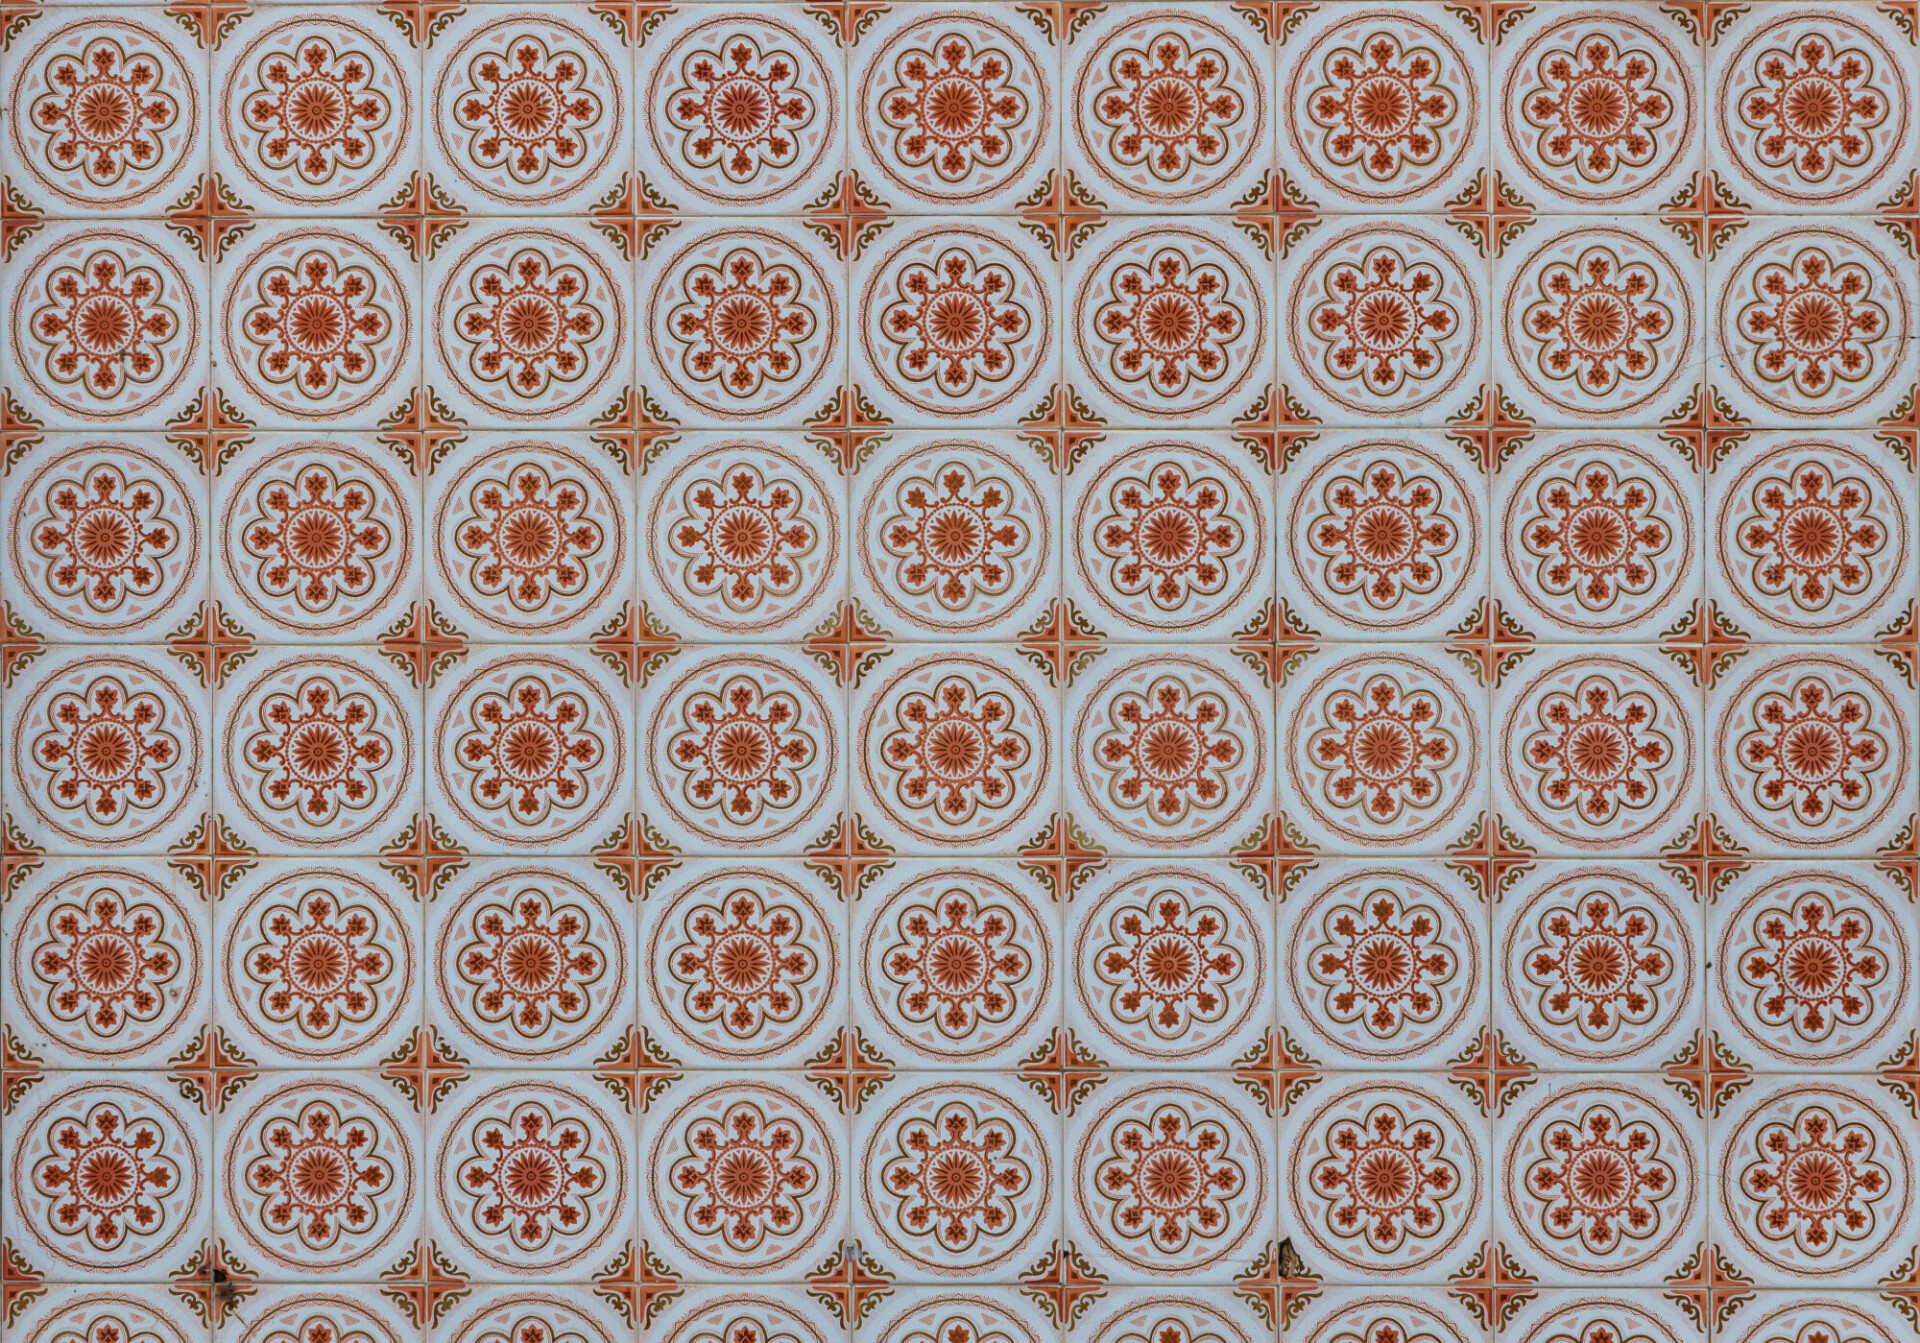 Old fashioned tile texture with orange flowers